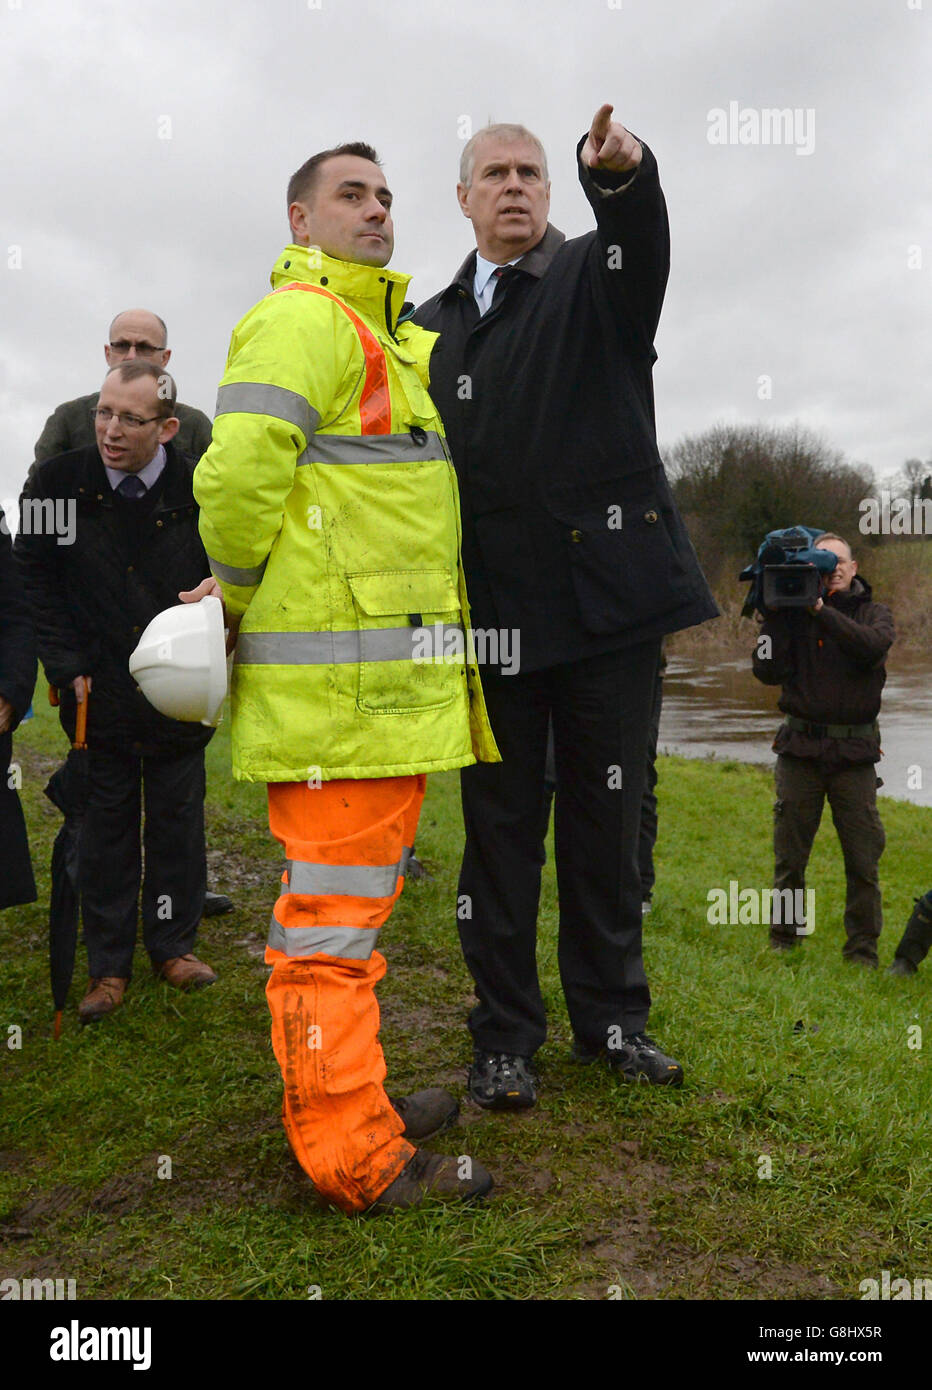 The Duke of York talks to Andrew Wood, Senior Engineer with North Yorkshire County Council, as they look at the damaged bridge over the River Wharfe in Tadcaster, during his visit to the area to view flood damage. Stock Photo